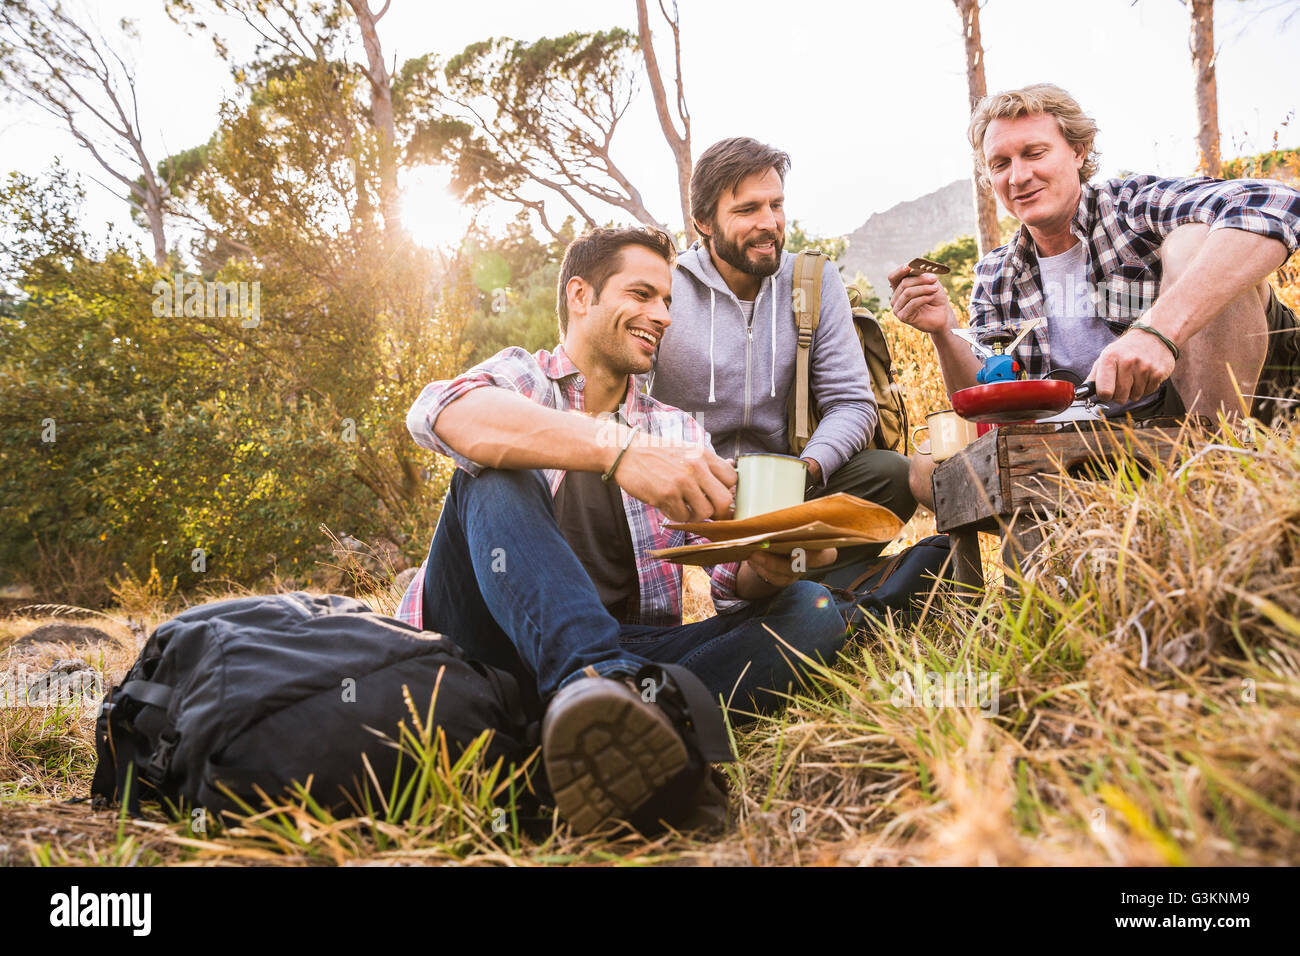 Three men frying breakfast on camping stove in forest, Deer Park, Cape Town, South Africa Stock Photo